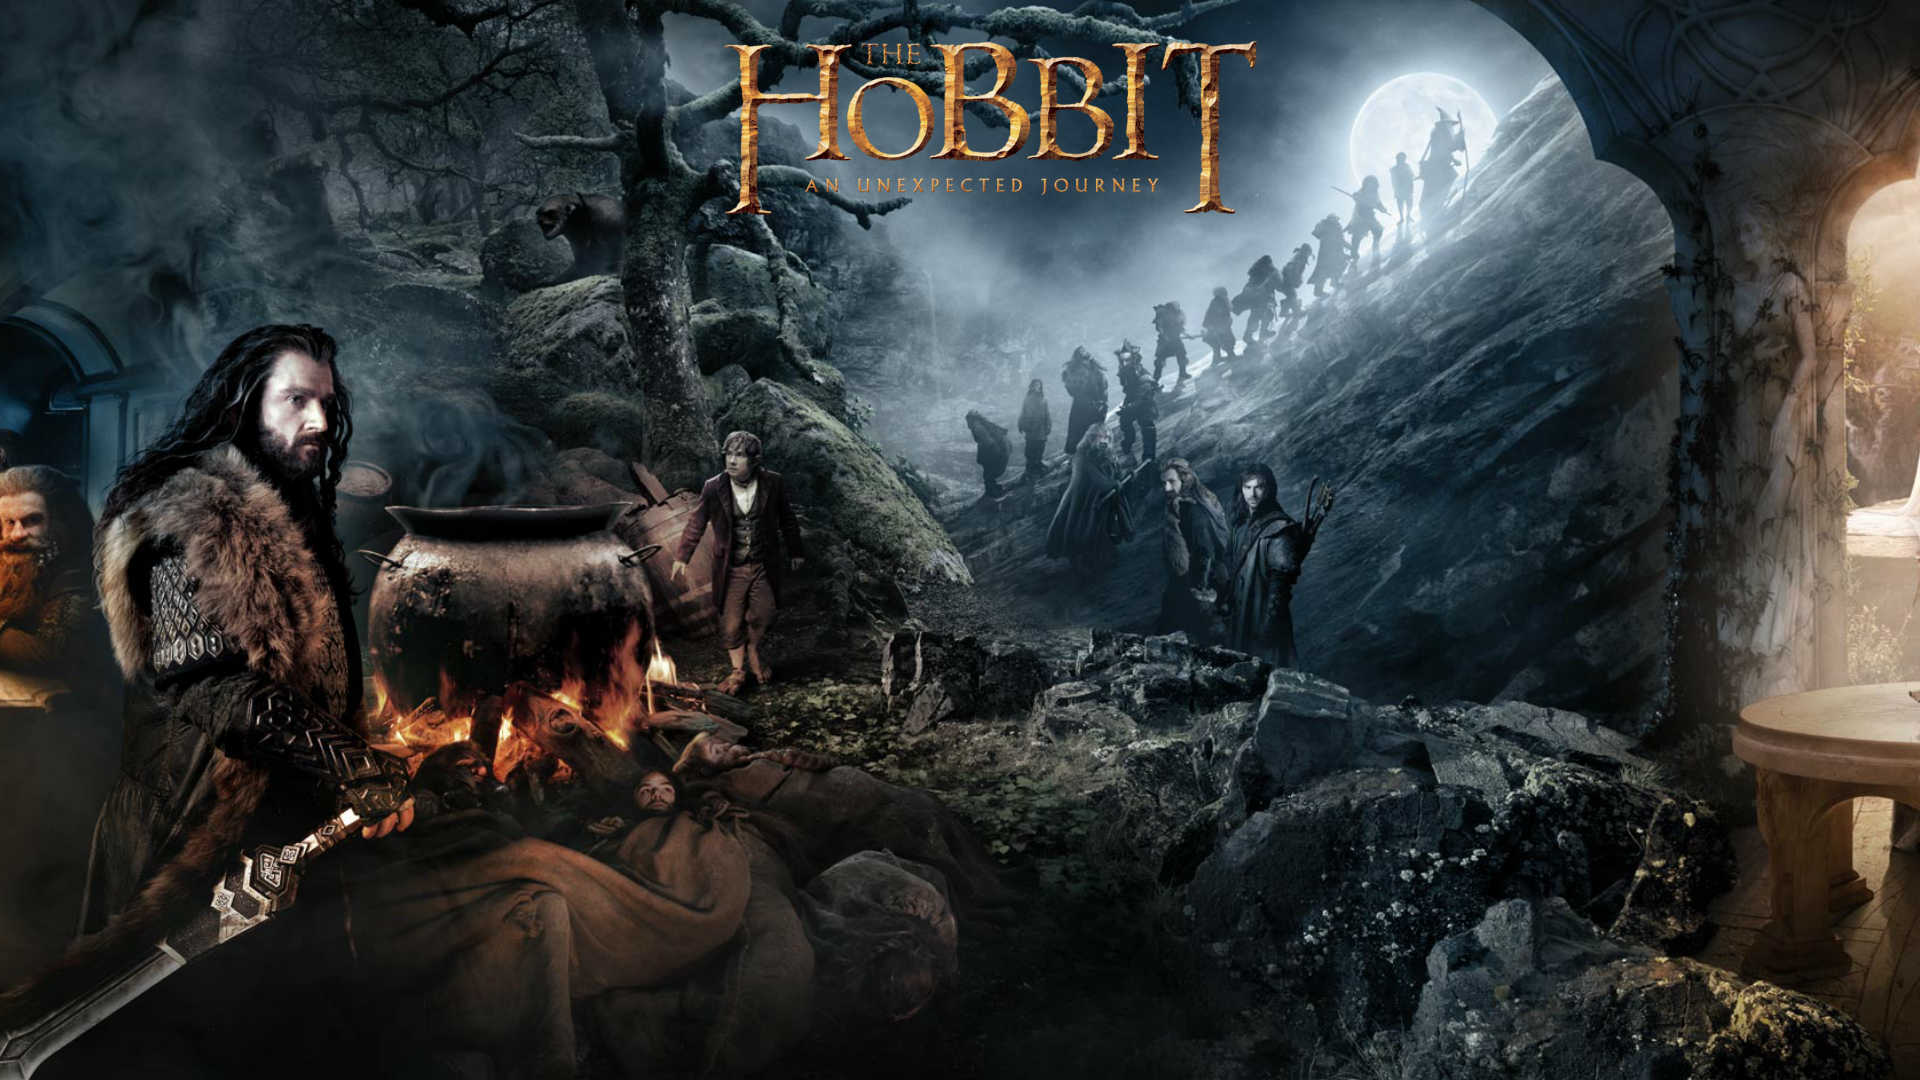 130+ The Hobbit: An Unexpected Journey HD Wallpapers and Backgrounds